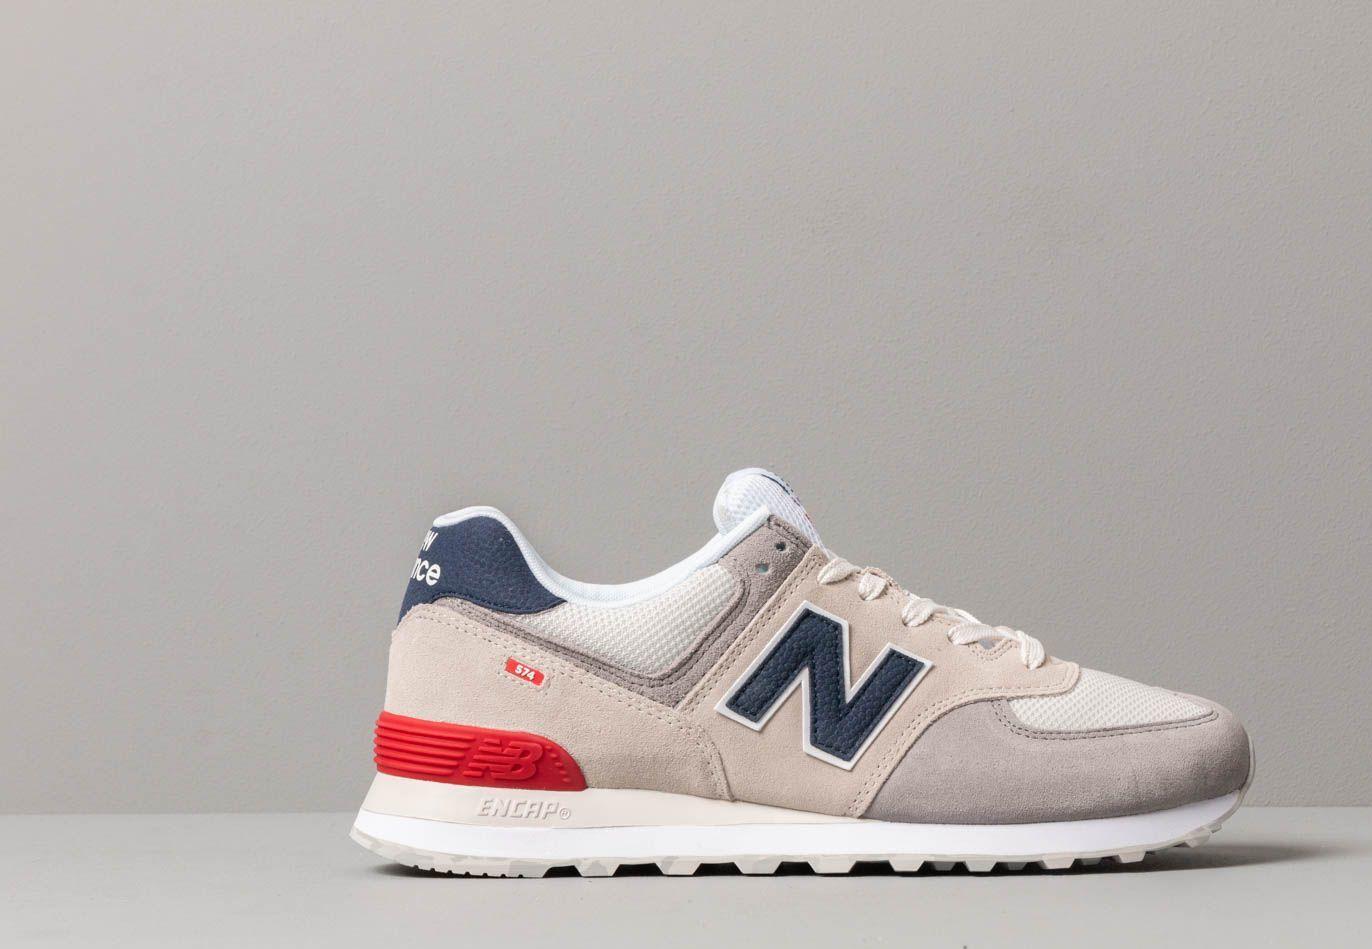 Quite stereo fiction new balance 574 red and grey Strengthen hat sleep